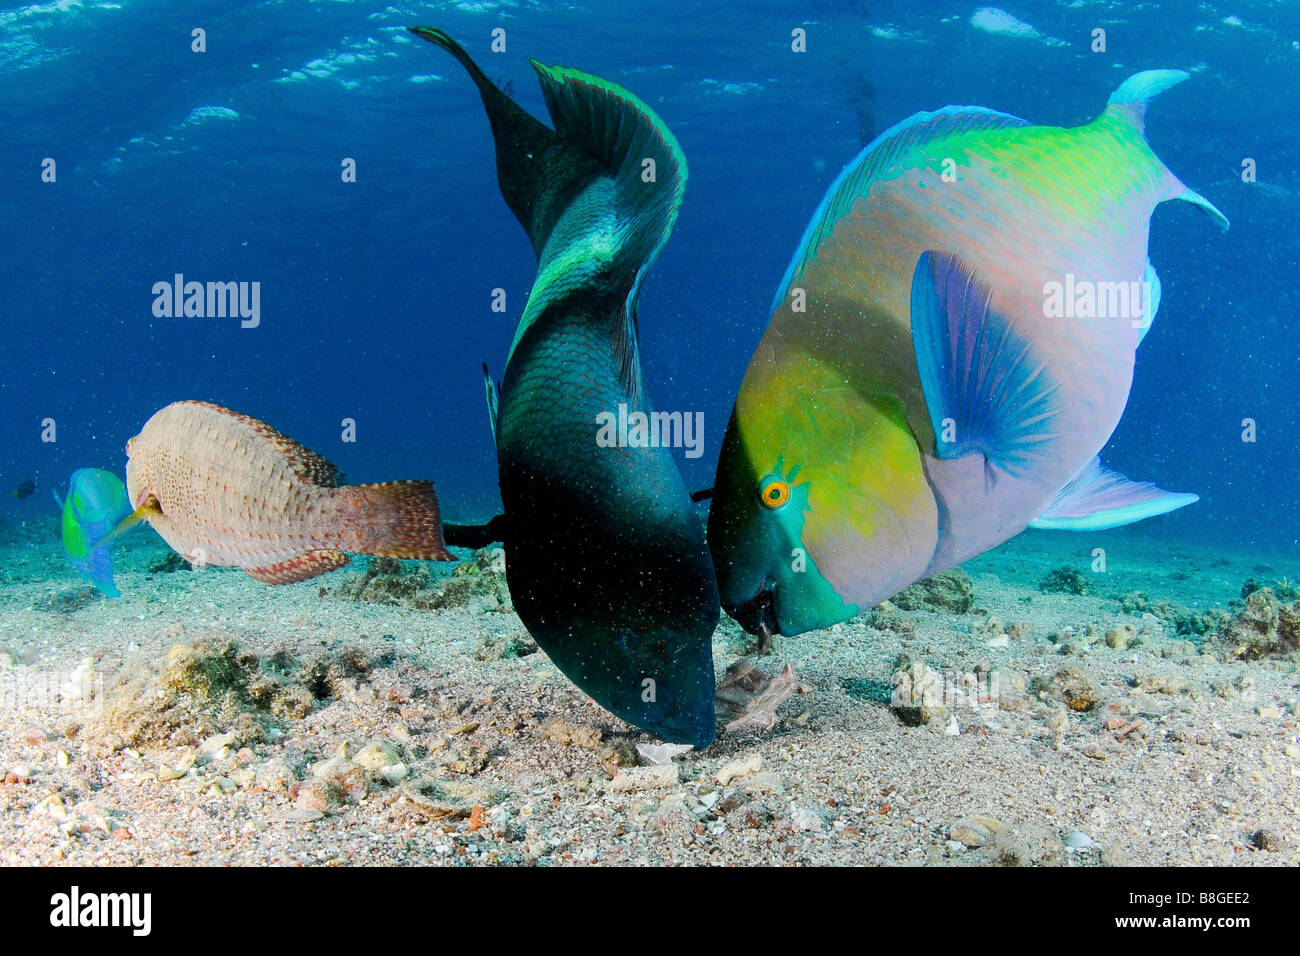 a humphead wrasse Cheilinus undulatus and a Rusty parrotfish scarus ferrugineus in a frenzy of eating Stock Photo